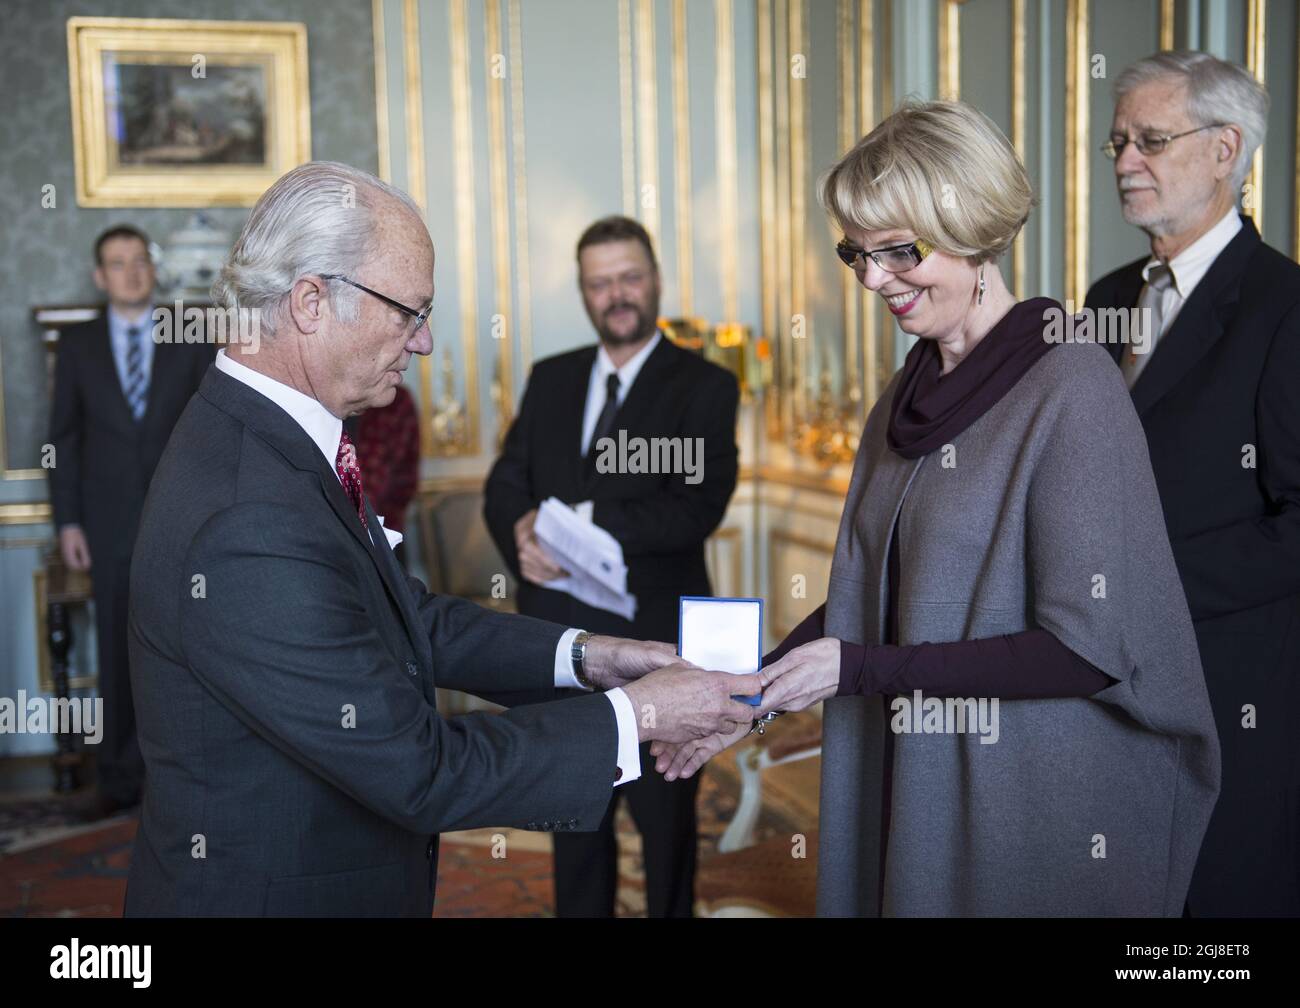 STOCKHOLM 20140414 King Carl XVI Gustaf is seen together with Professor Compton James Tucker of NASA and Professor Gudrun Gisladotti of the University of Iceland during a medal ceremony at the Royal Palace of Sweden, April 14, 2014. Professor Tucker received the Vega medal, a Swedish award to individuals who 'excellently promoted the geographical research'. Professor Gisladottir received the Wahlberg's gold medal for her broad and deep knowledge in the 'land degradation and desertification,Â” The medals are awarded by the Swedish Society for Anthropology and Geography. Foto: Pontus Lundahl /  Stock Photo